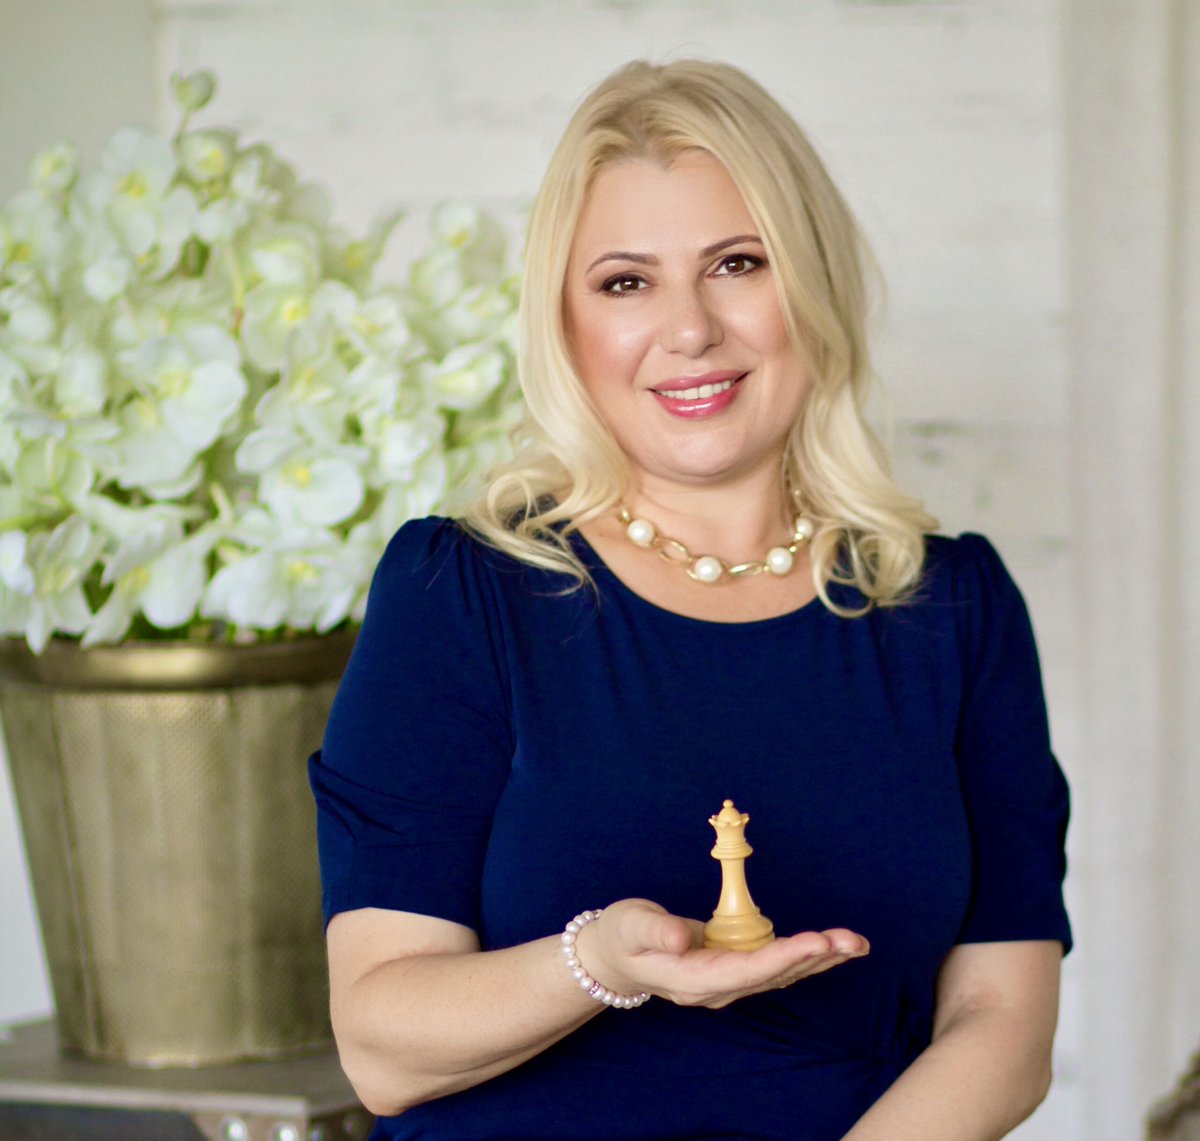 Happy 55th Birthday to the 8th Women's World Champion, Susan Polgar! @SusanPolgar 🎉🎂 Did you know she's a multiple-time Olympic medalist and was the third woman ever to be awarded the Grandmaster title (1991)? Also, she became the world's top-ranked female chess player at the